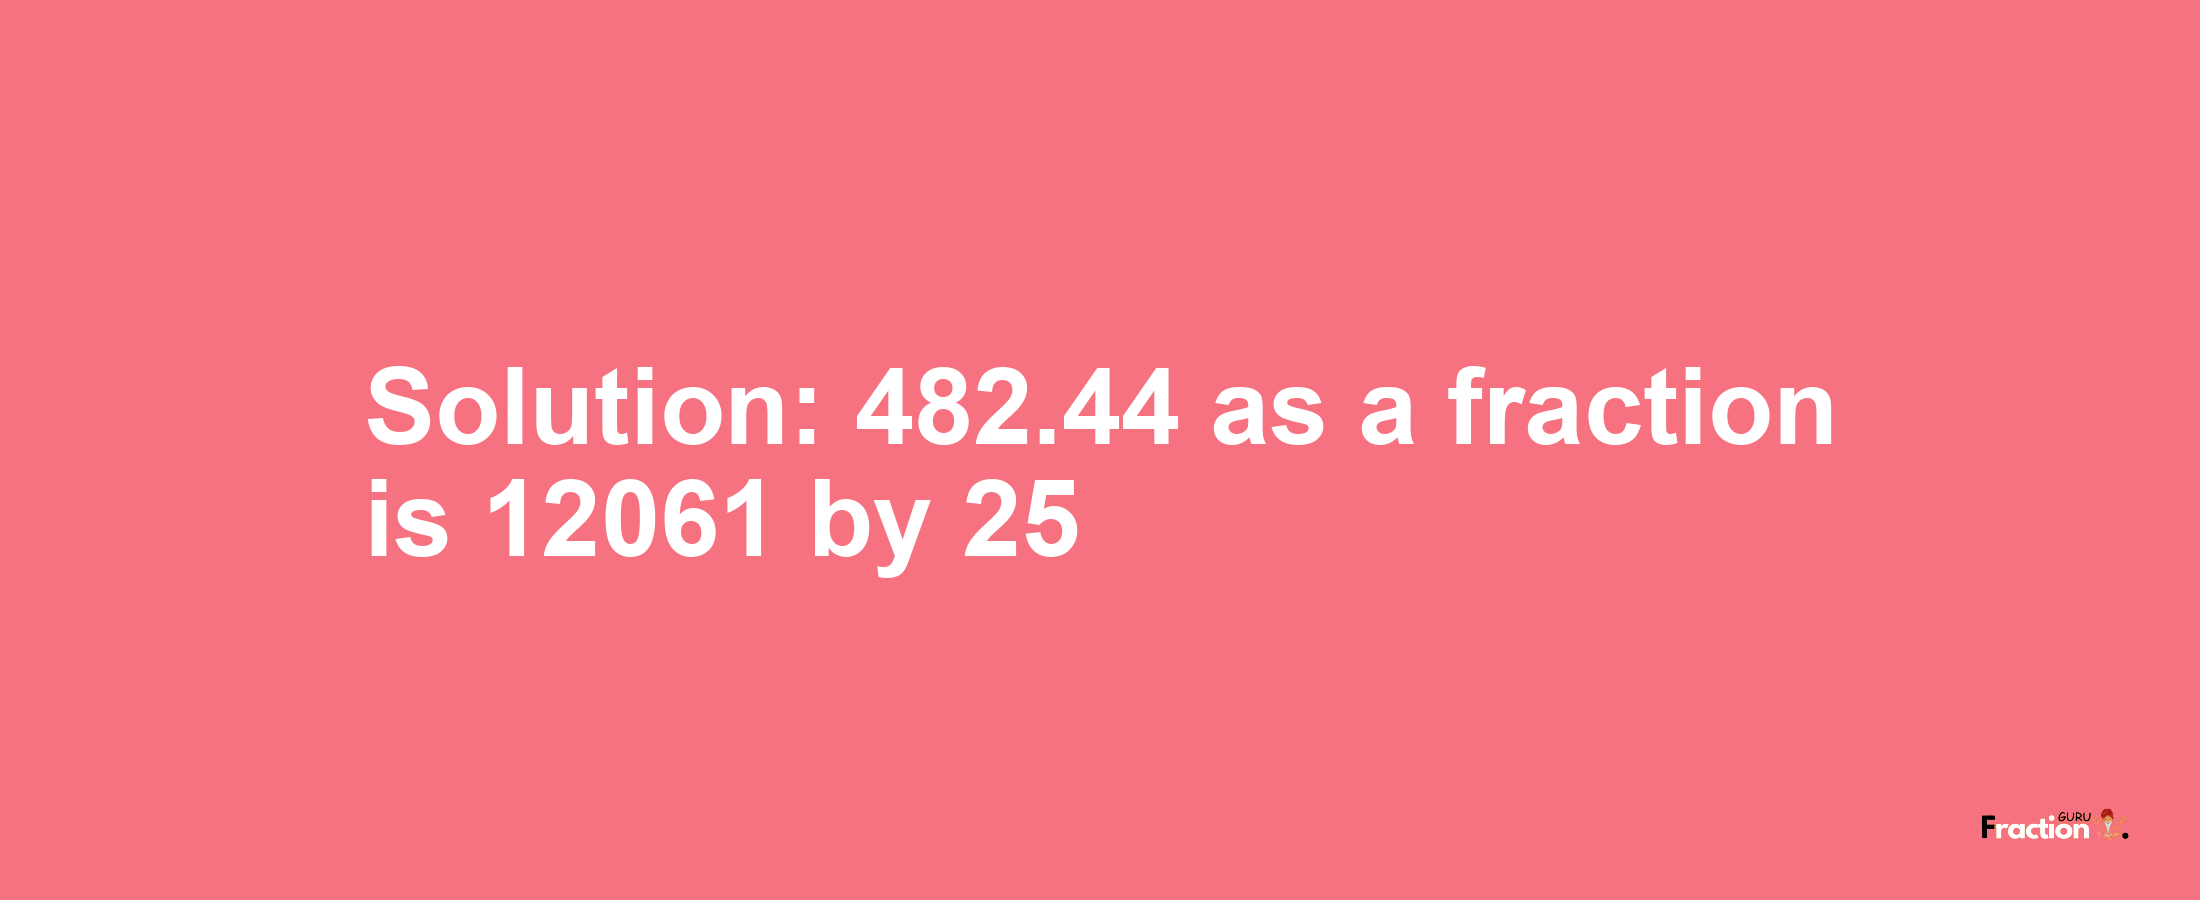 Solution:482.44 as a fraction is 12061/25